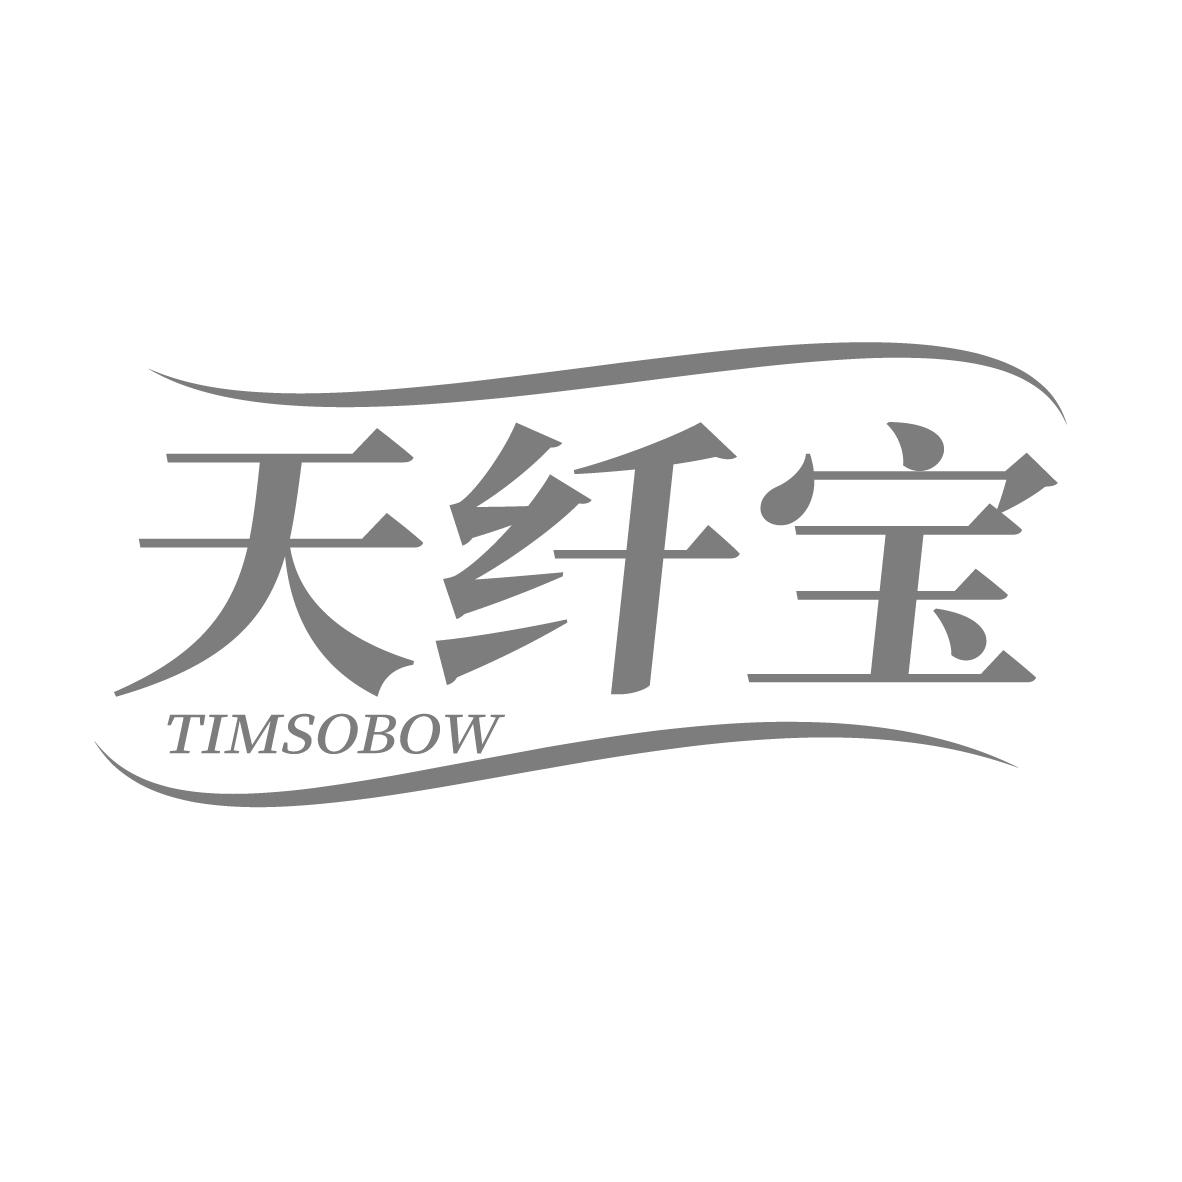 ˱ TIMSOBOW